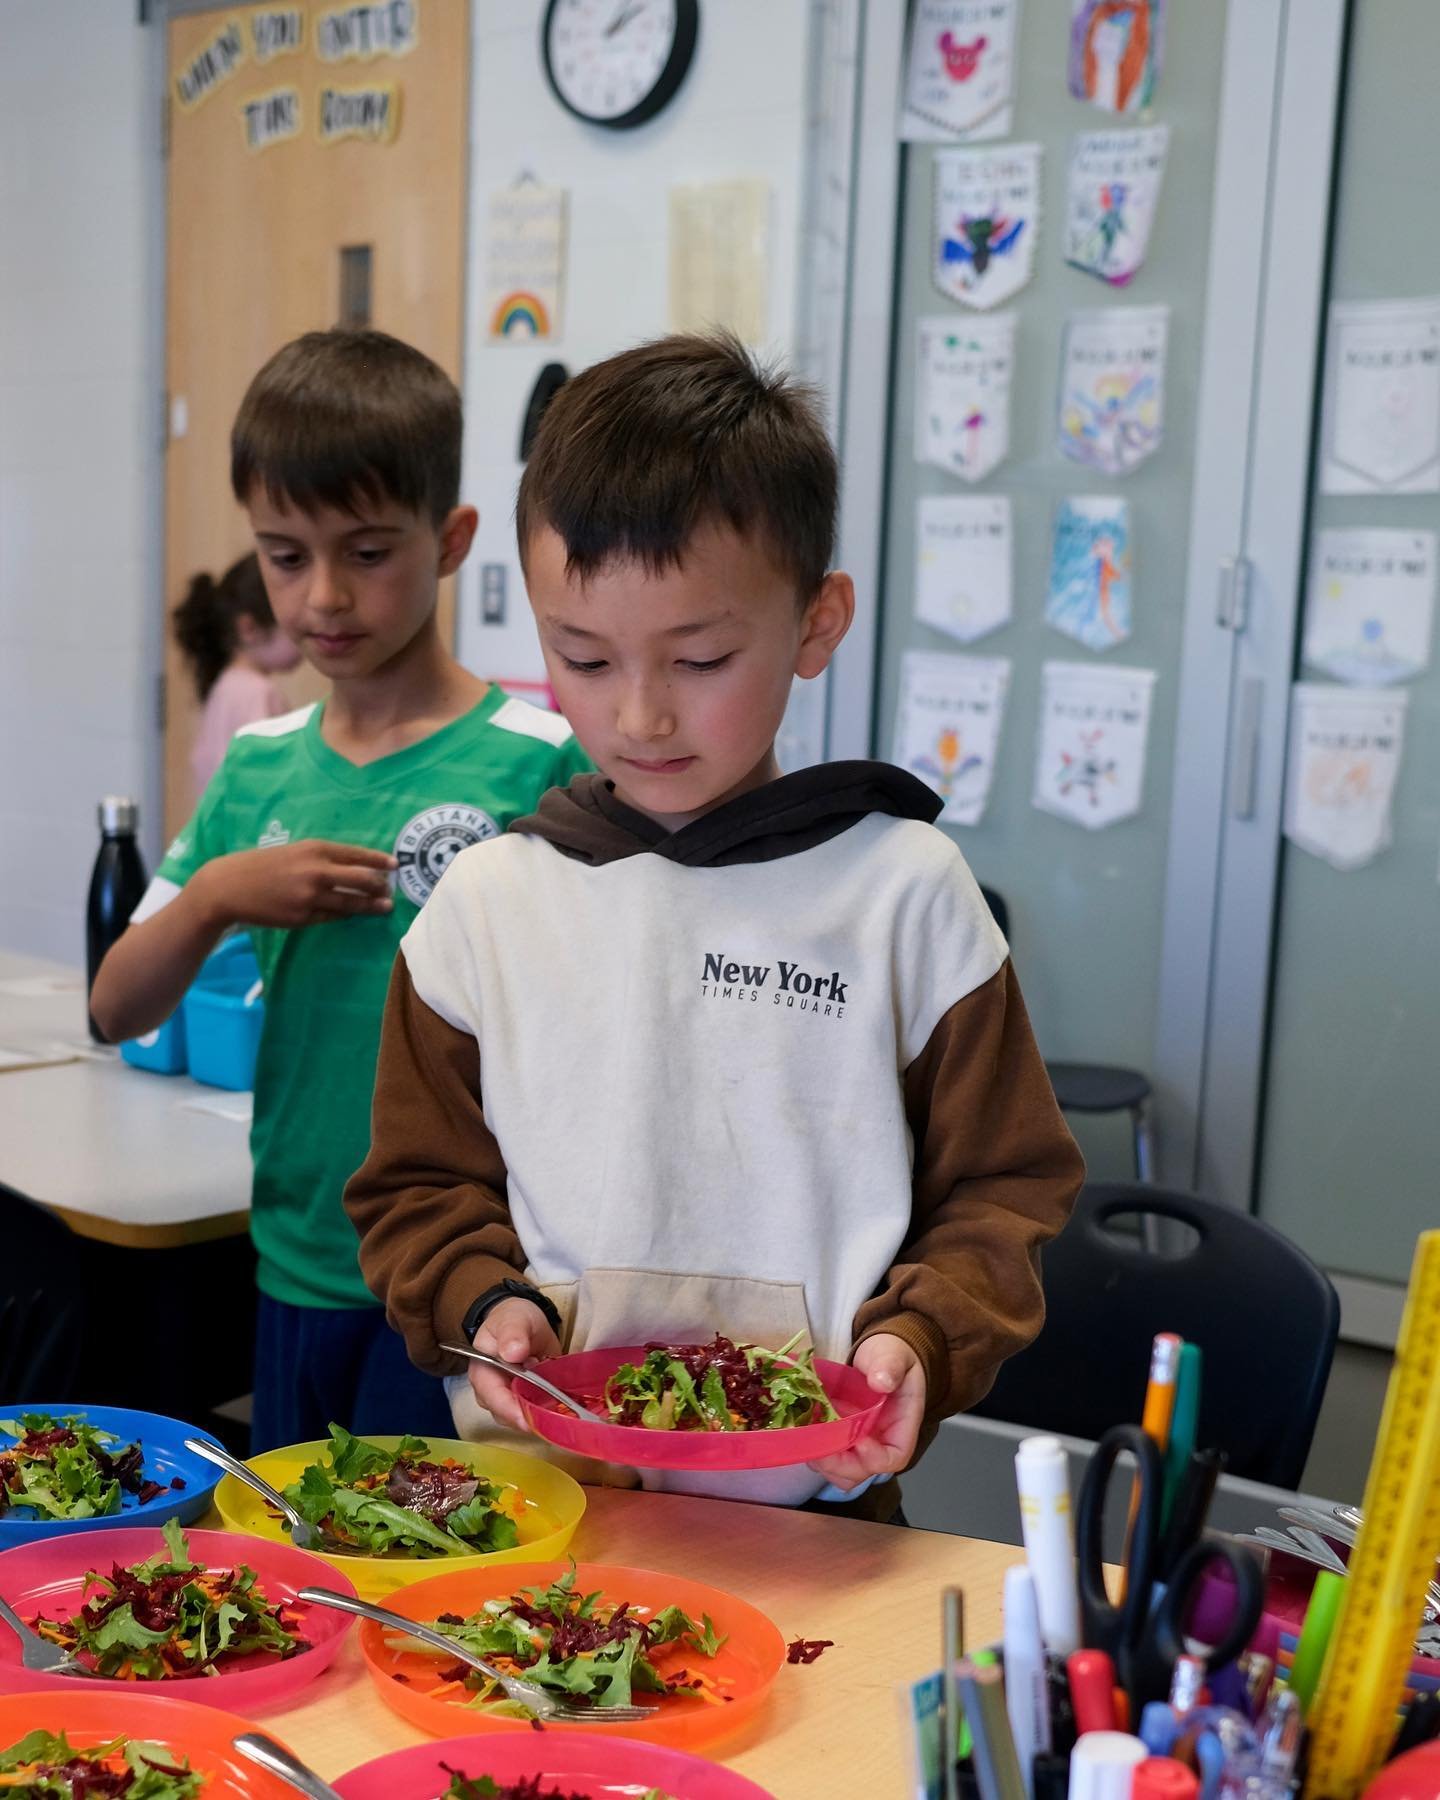 After making our honey vinaigrette dressing (see our last post!), the students got to taste-test their creation in a salad. We encouraged them to note the different flavours and textures of their plate, challenging them to think beyond words like &ld